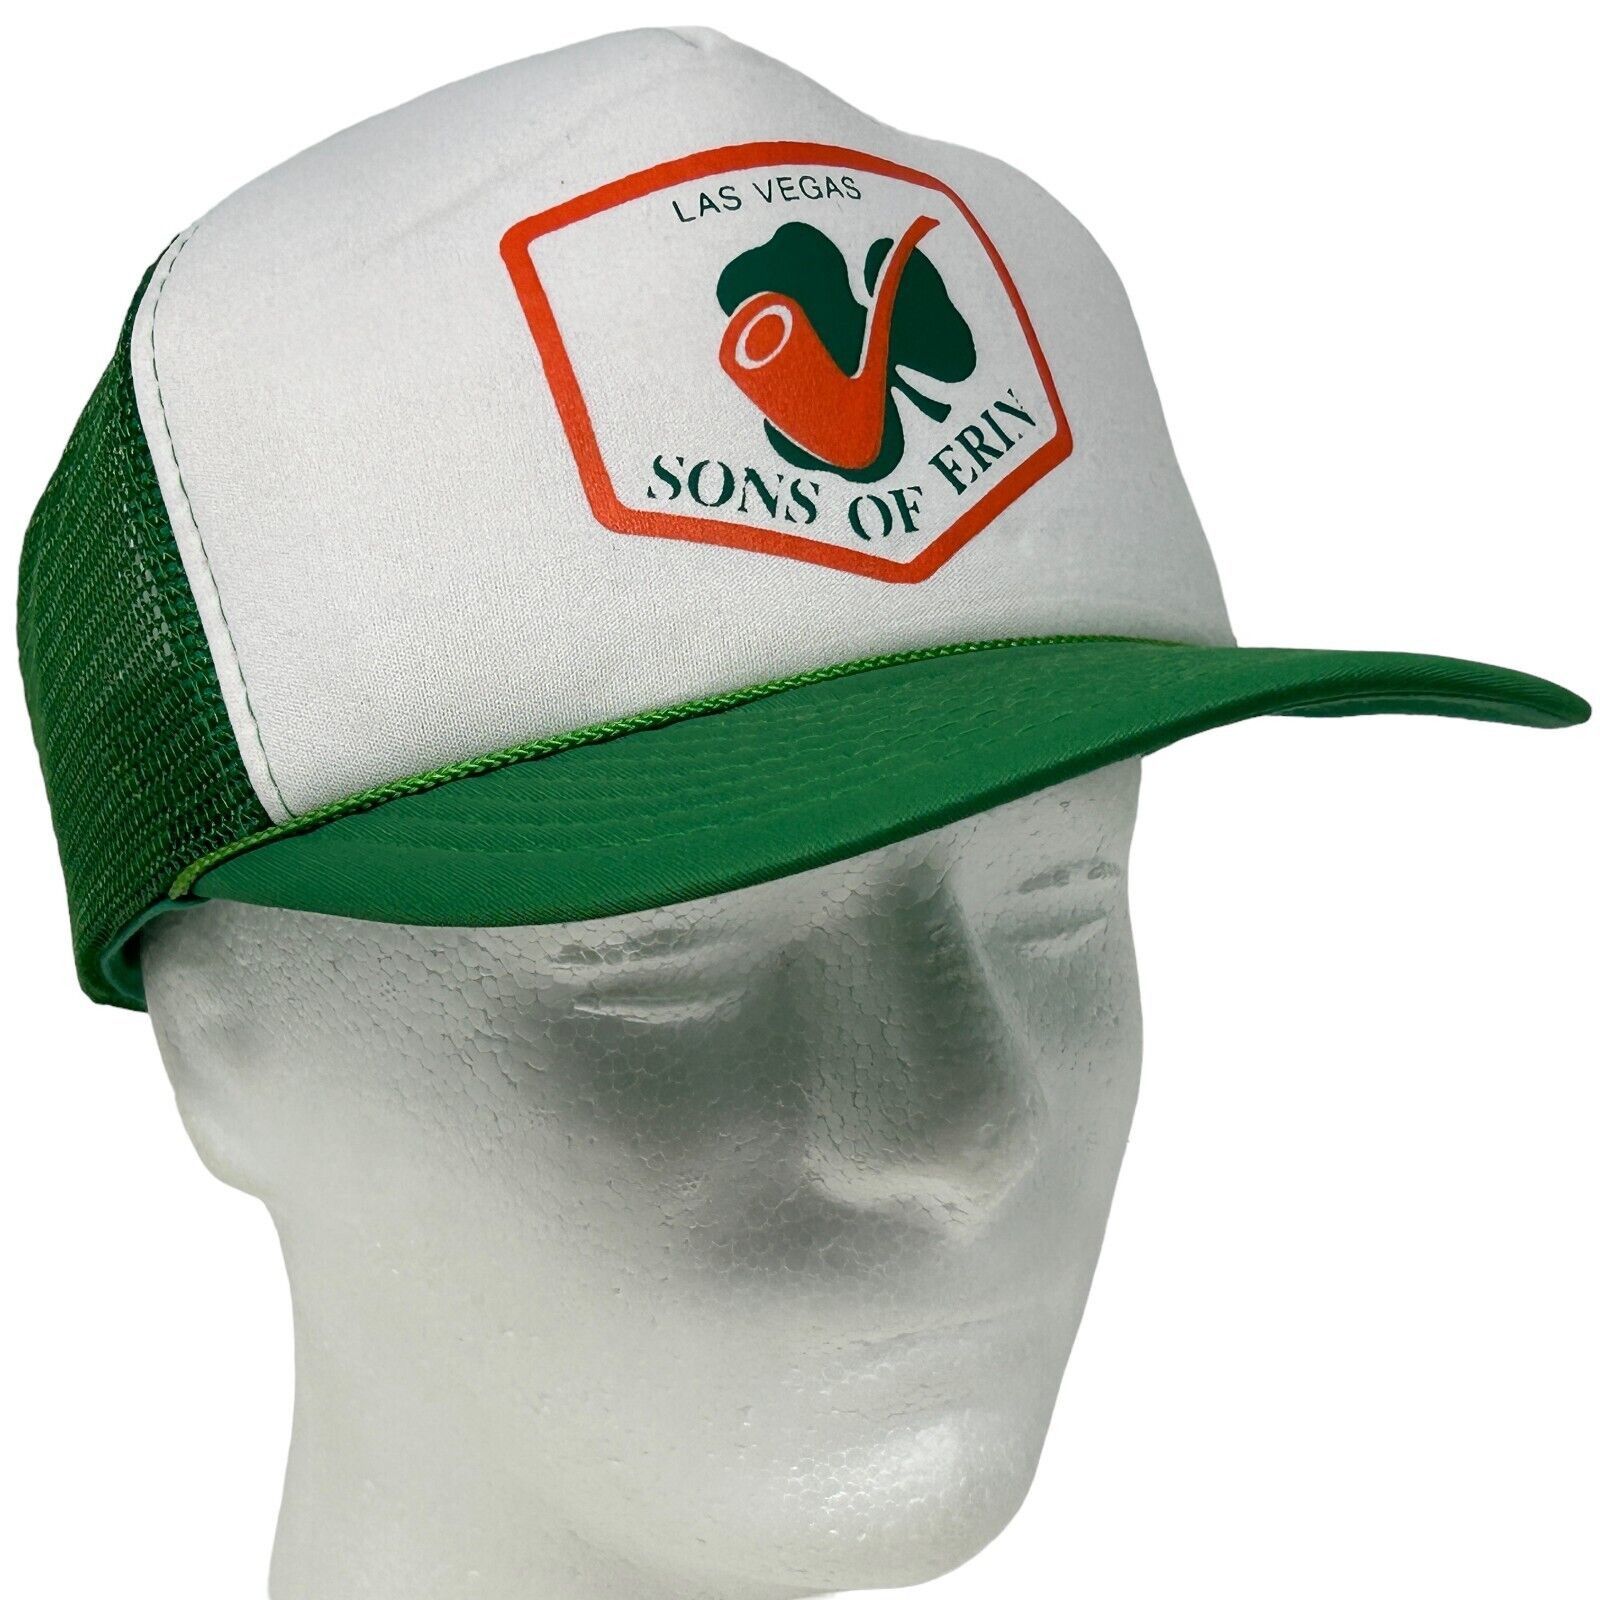 Vintage Sons of Erin Las Vegas Trucker Hat Vintage 90s Green Irish Size ONE SIZE - 1 Preview